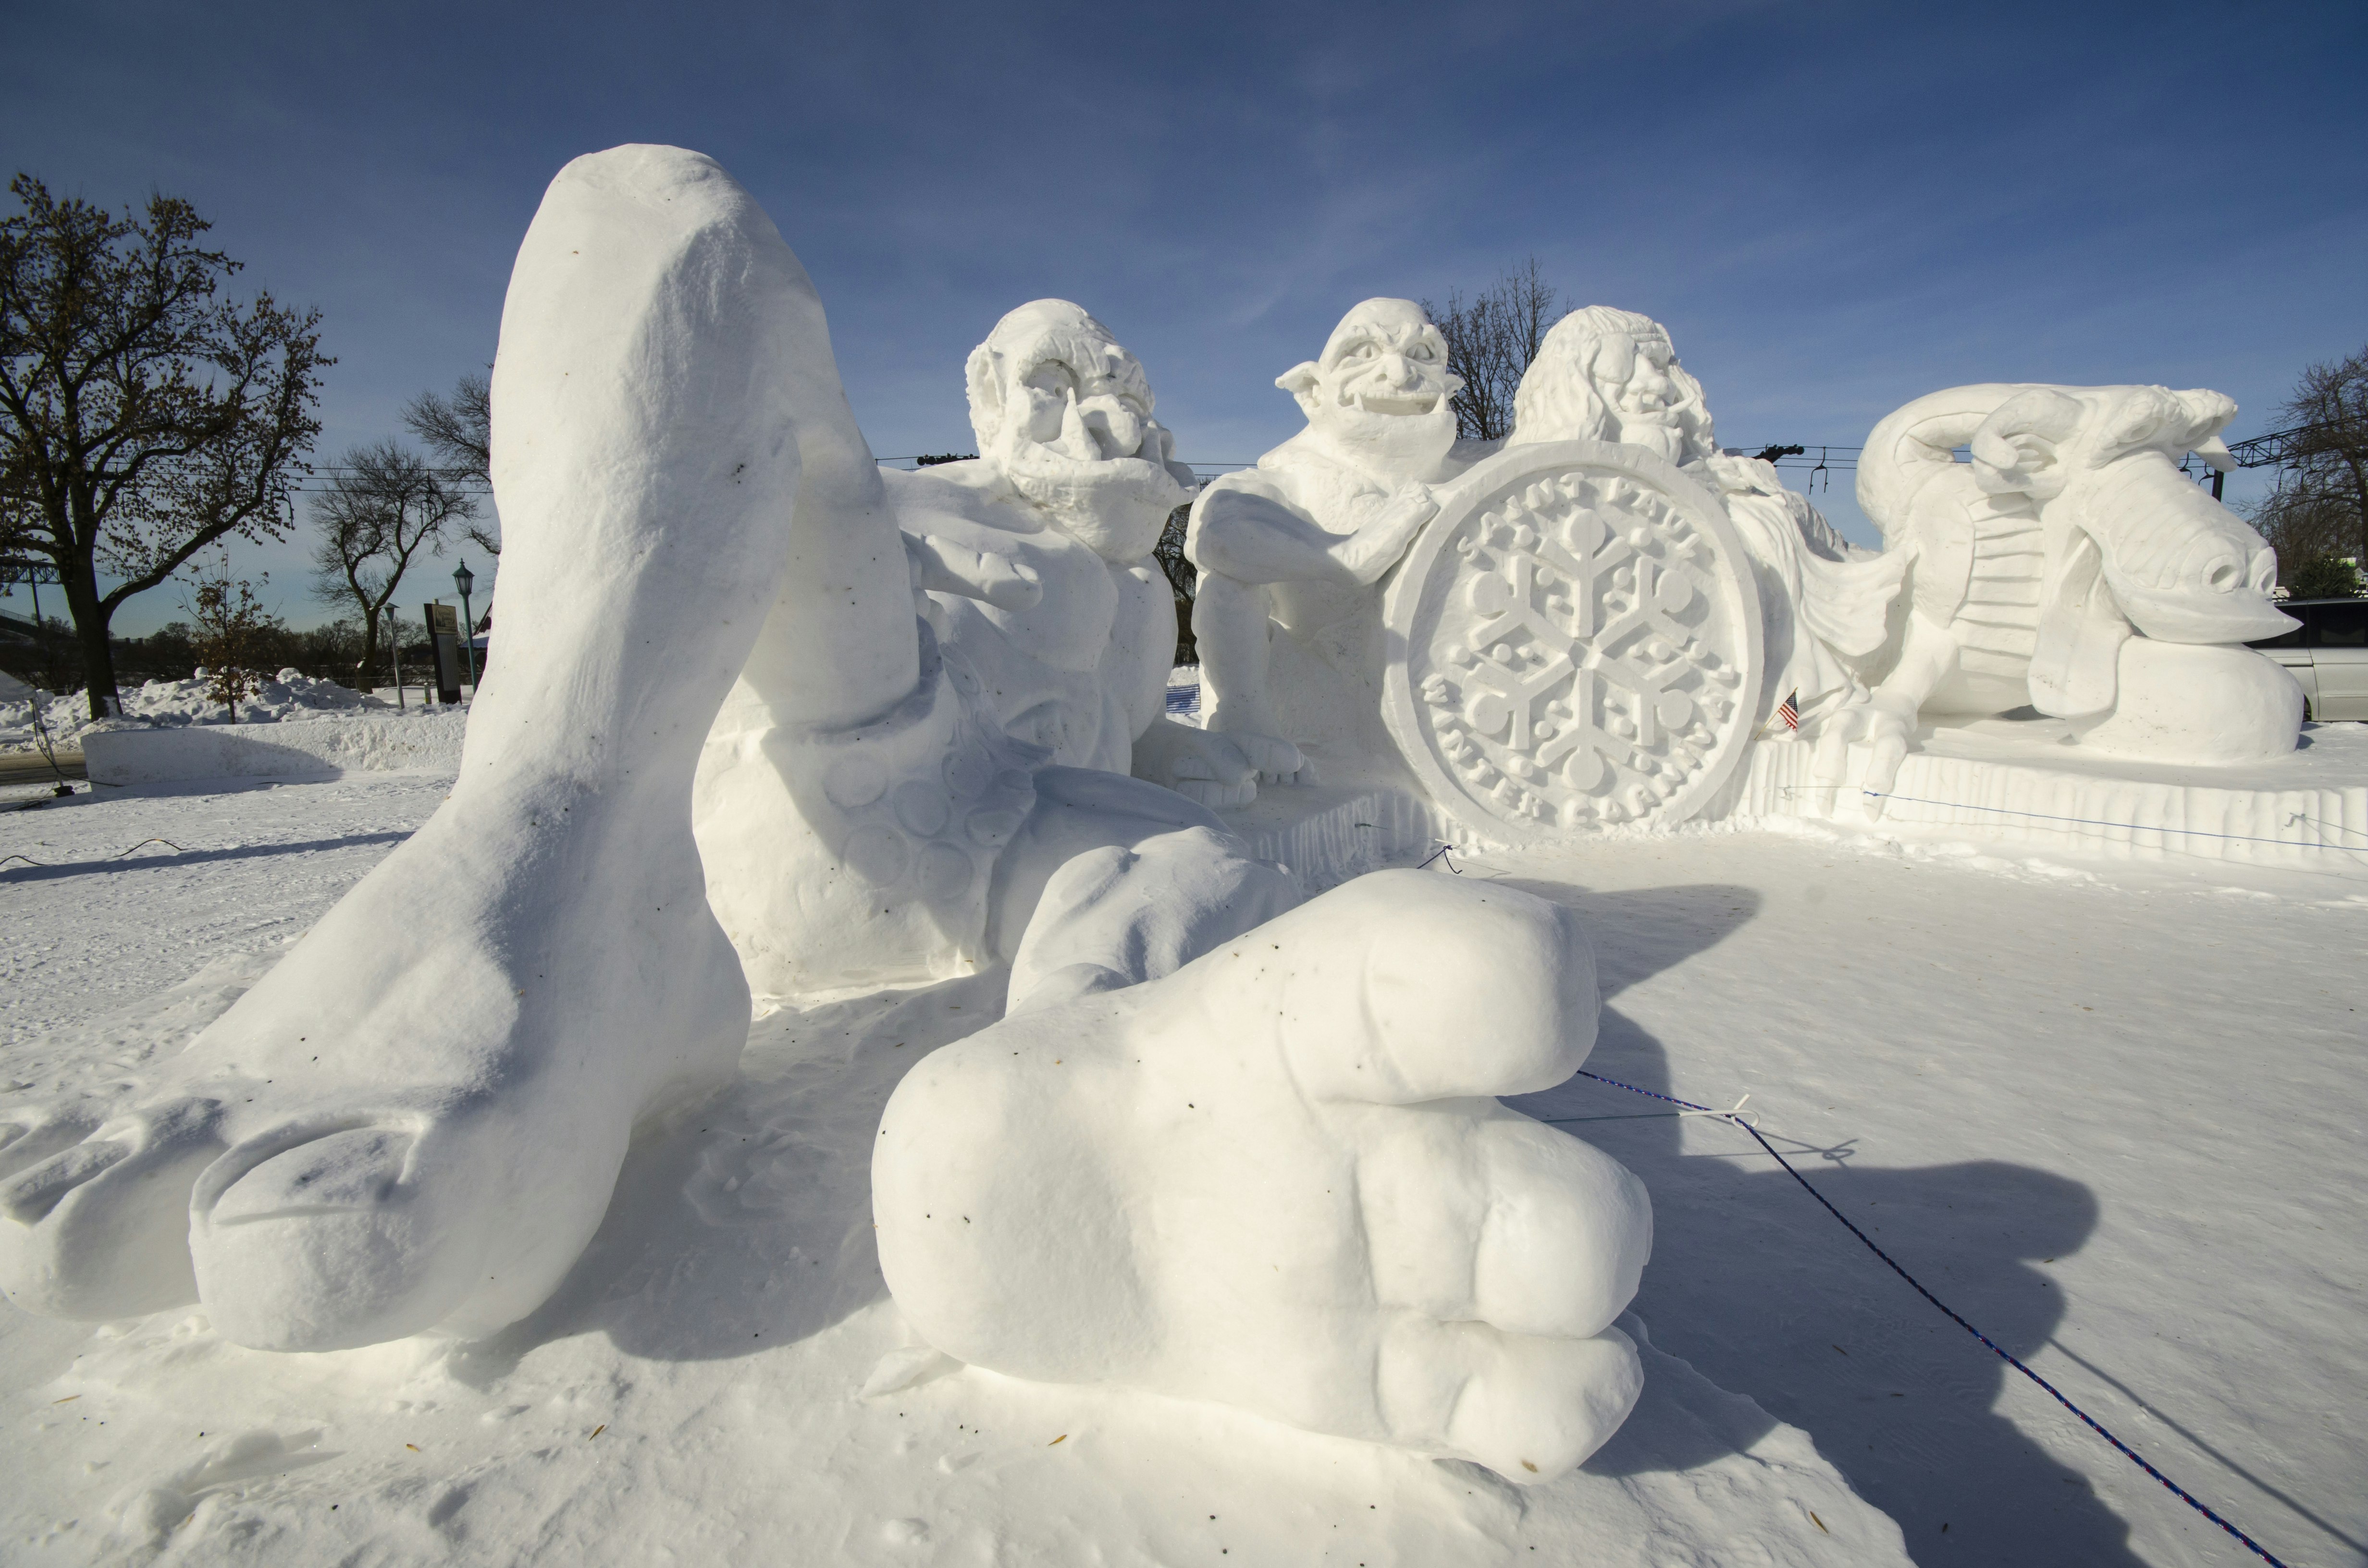 Large snow sculptures in the likeness of ogres and a dragon are on display at the St. Paul Winter Carnival.